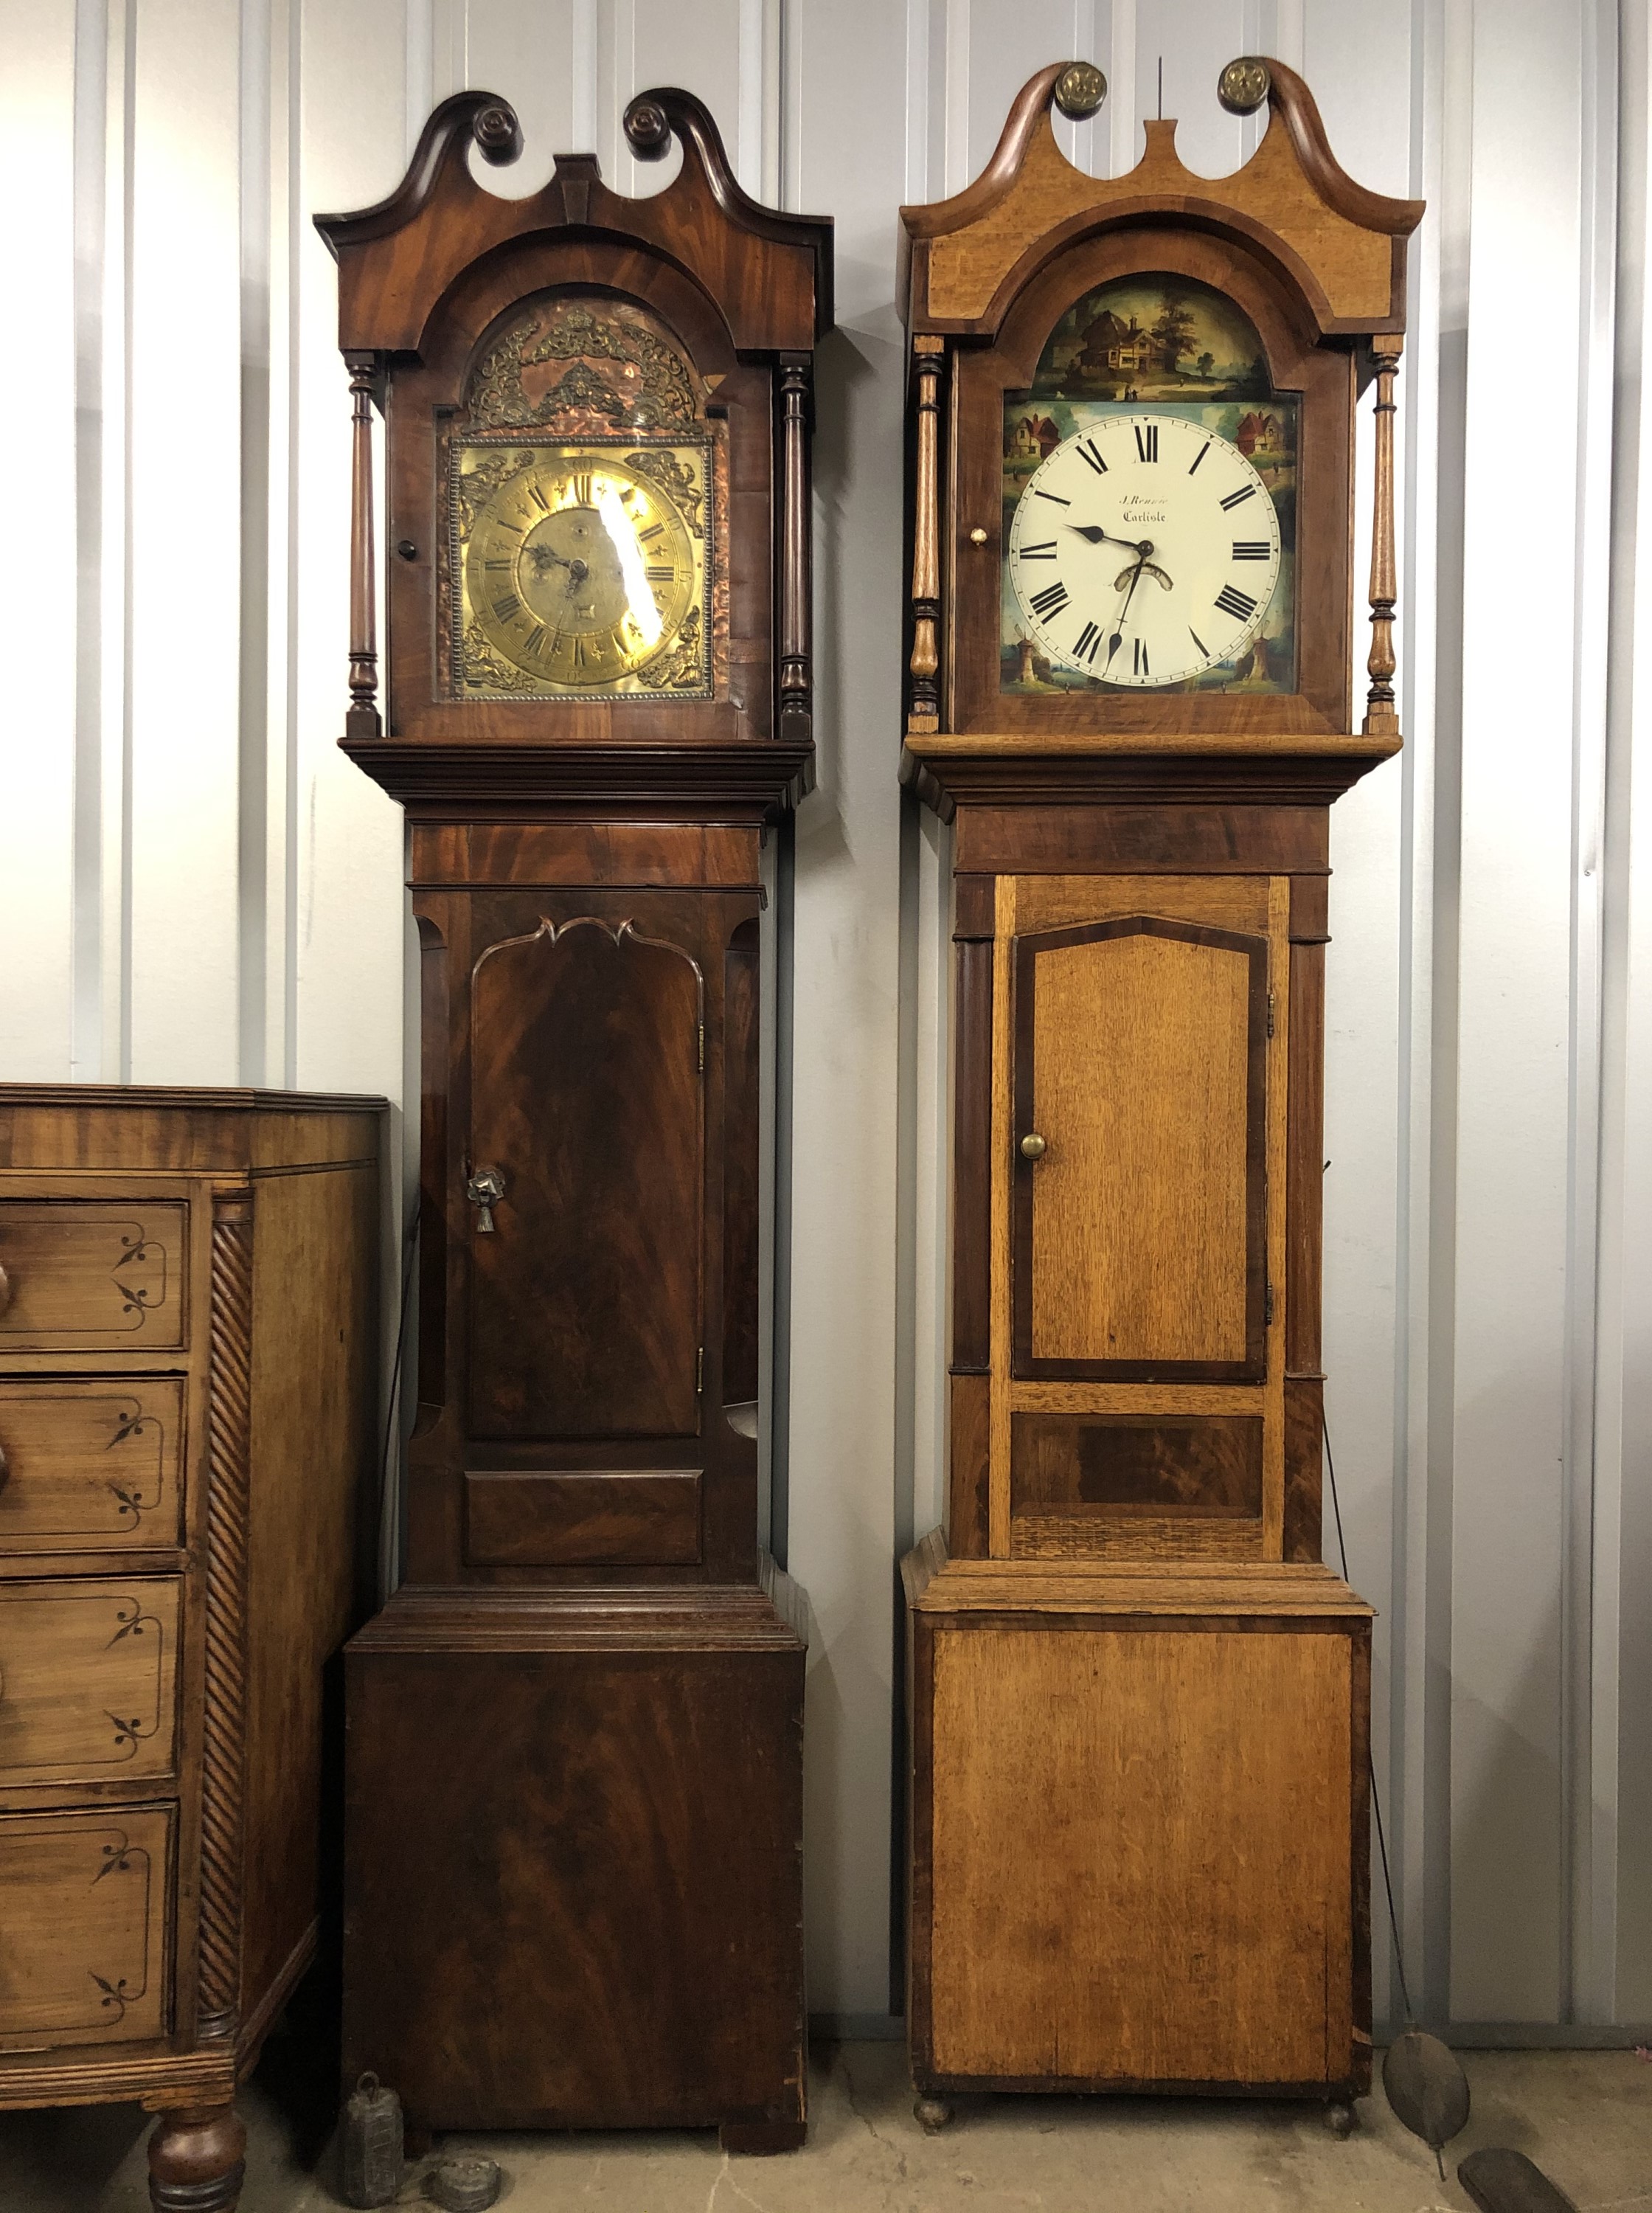 J Rennie, Carlisle, A 30-hour painted face long case clock in mahogany cross-banded oak case, 220